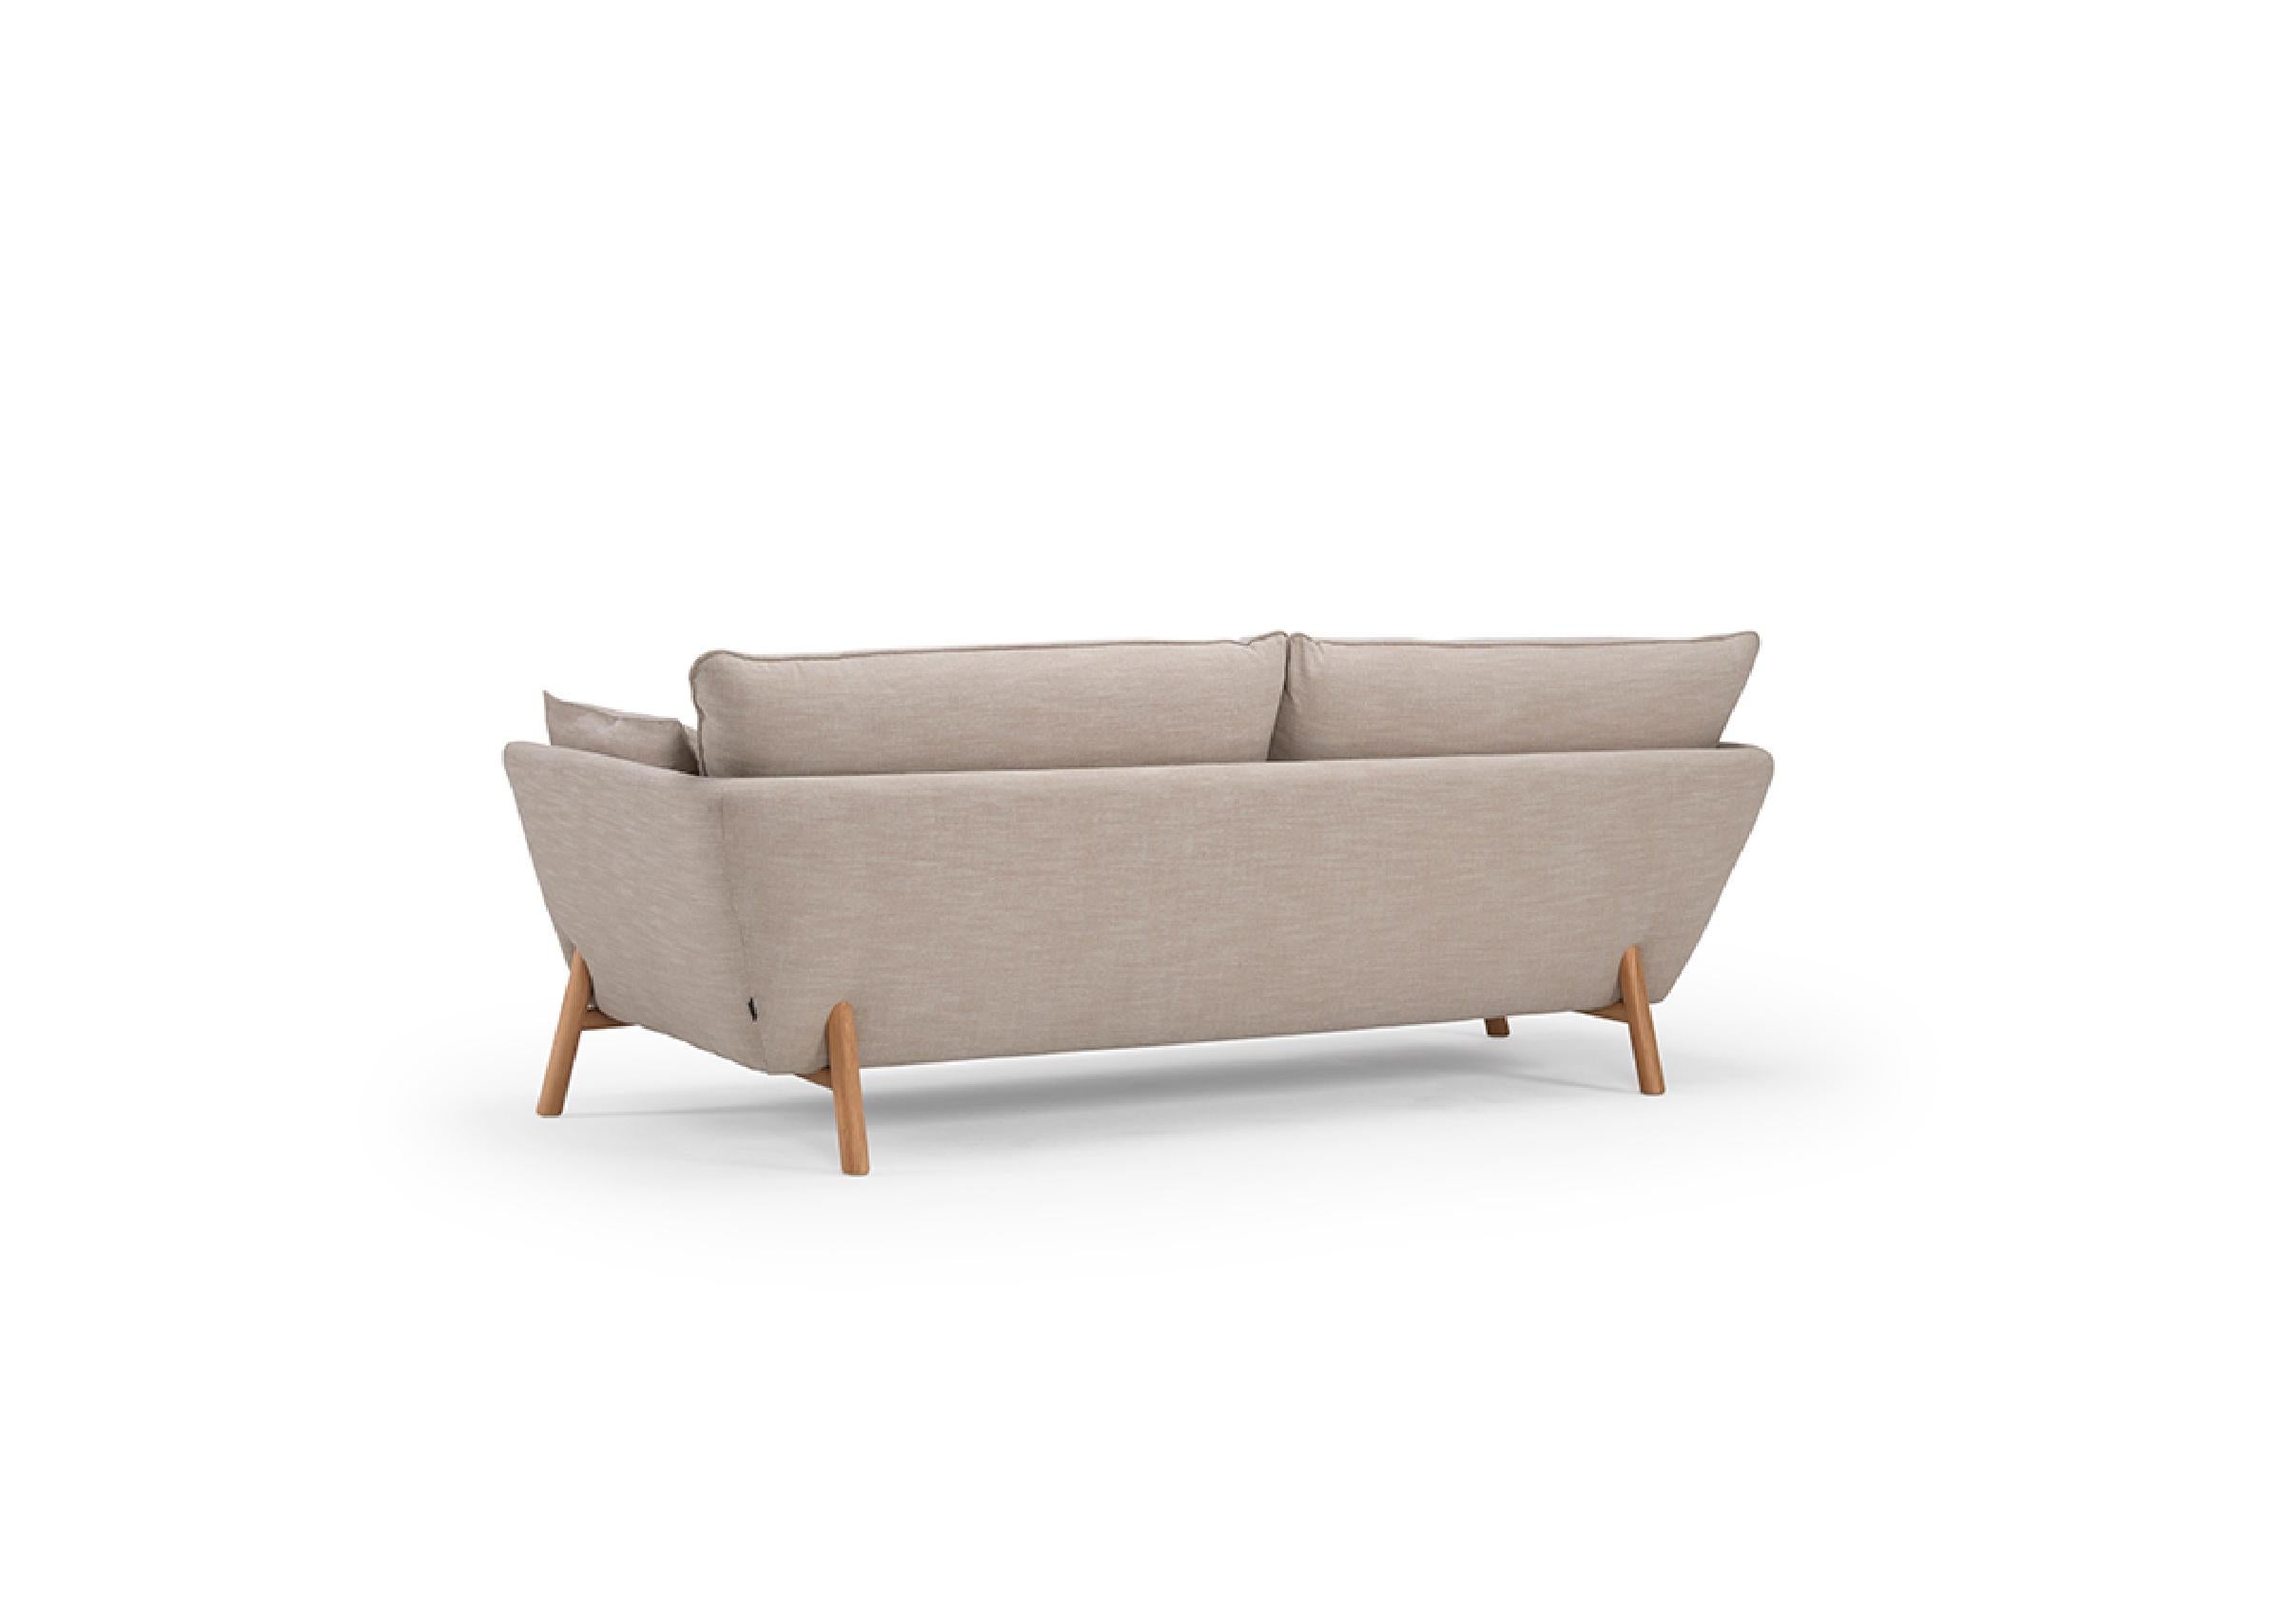 The Nave 2 Seater Sofa, with its clear contemporary allure, offers a harmonious blend of comfort and style. This OEM product, available with either black metal or oak lacquered legs, boasts a variety of fabric or wool upholstery finishes, inviting